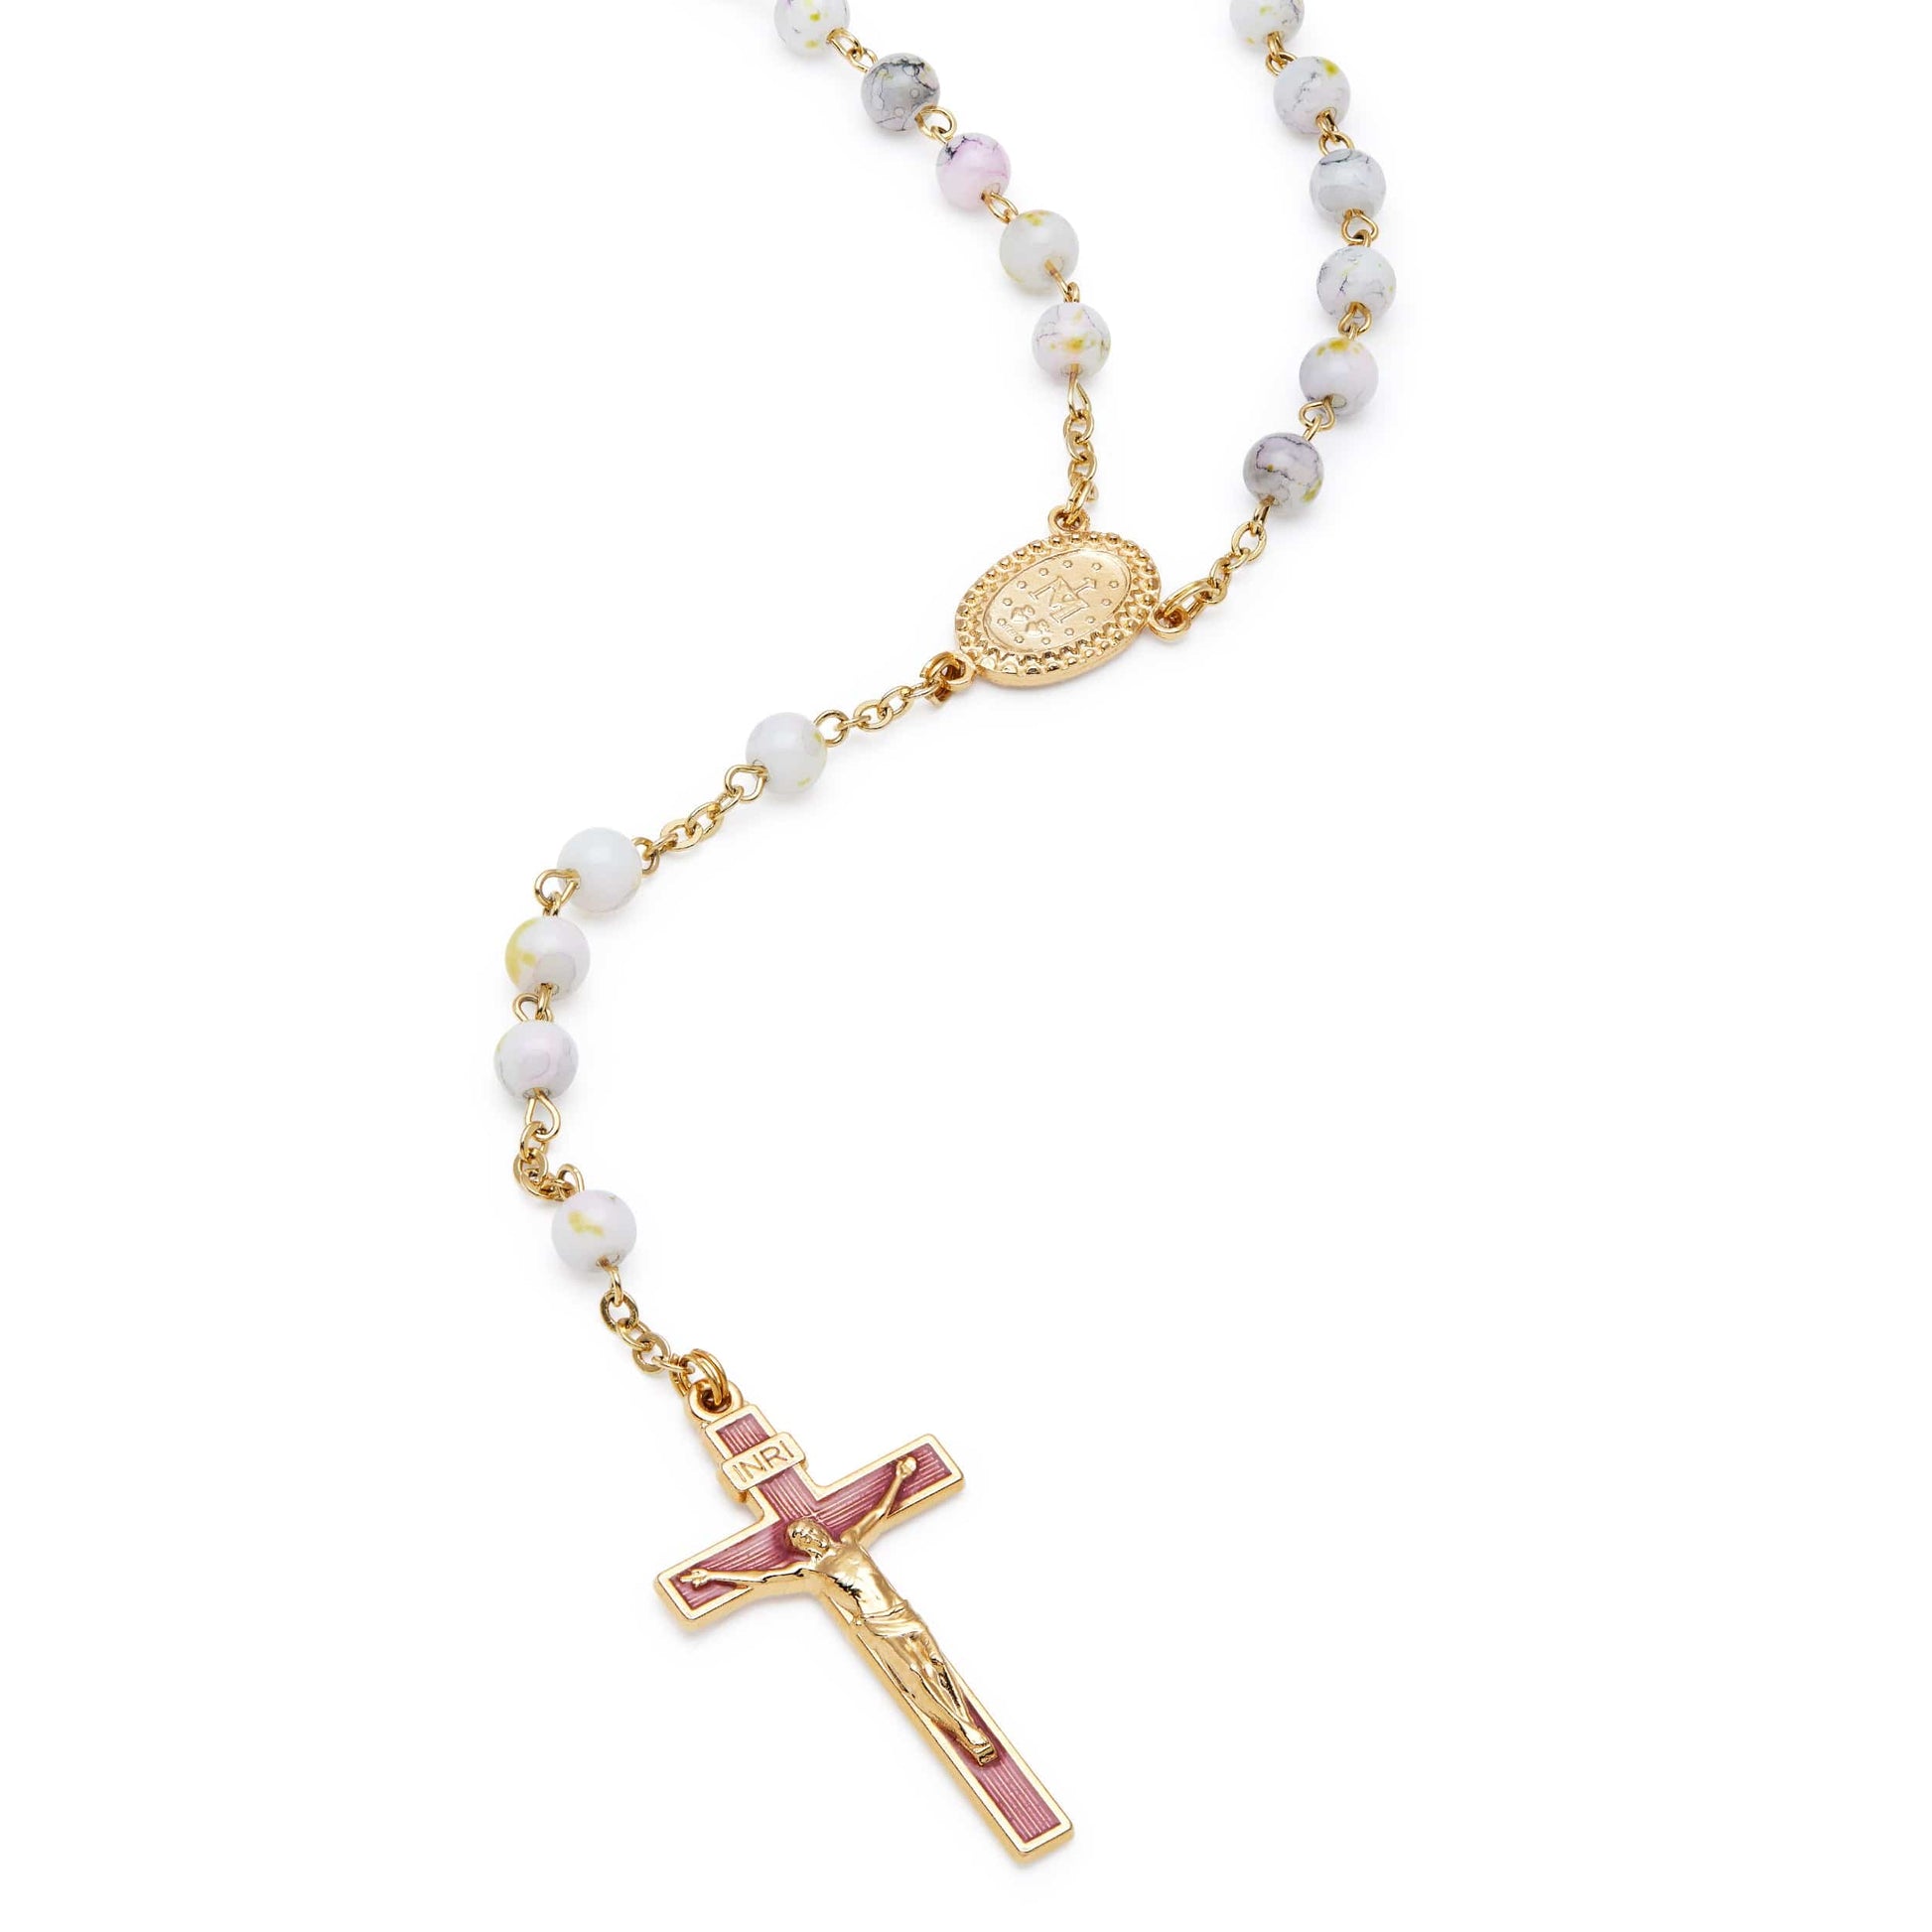 MONDO CATTOLICO Prayer Beads 47 cm (18.5 in) / 6 mm (0.24 in) White variegated glass rosary